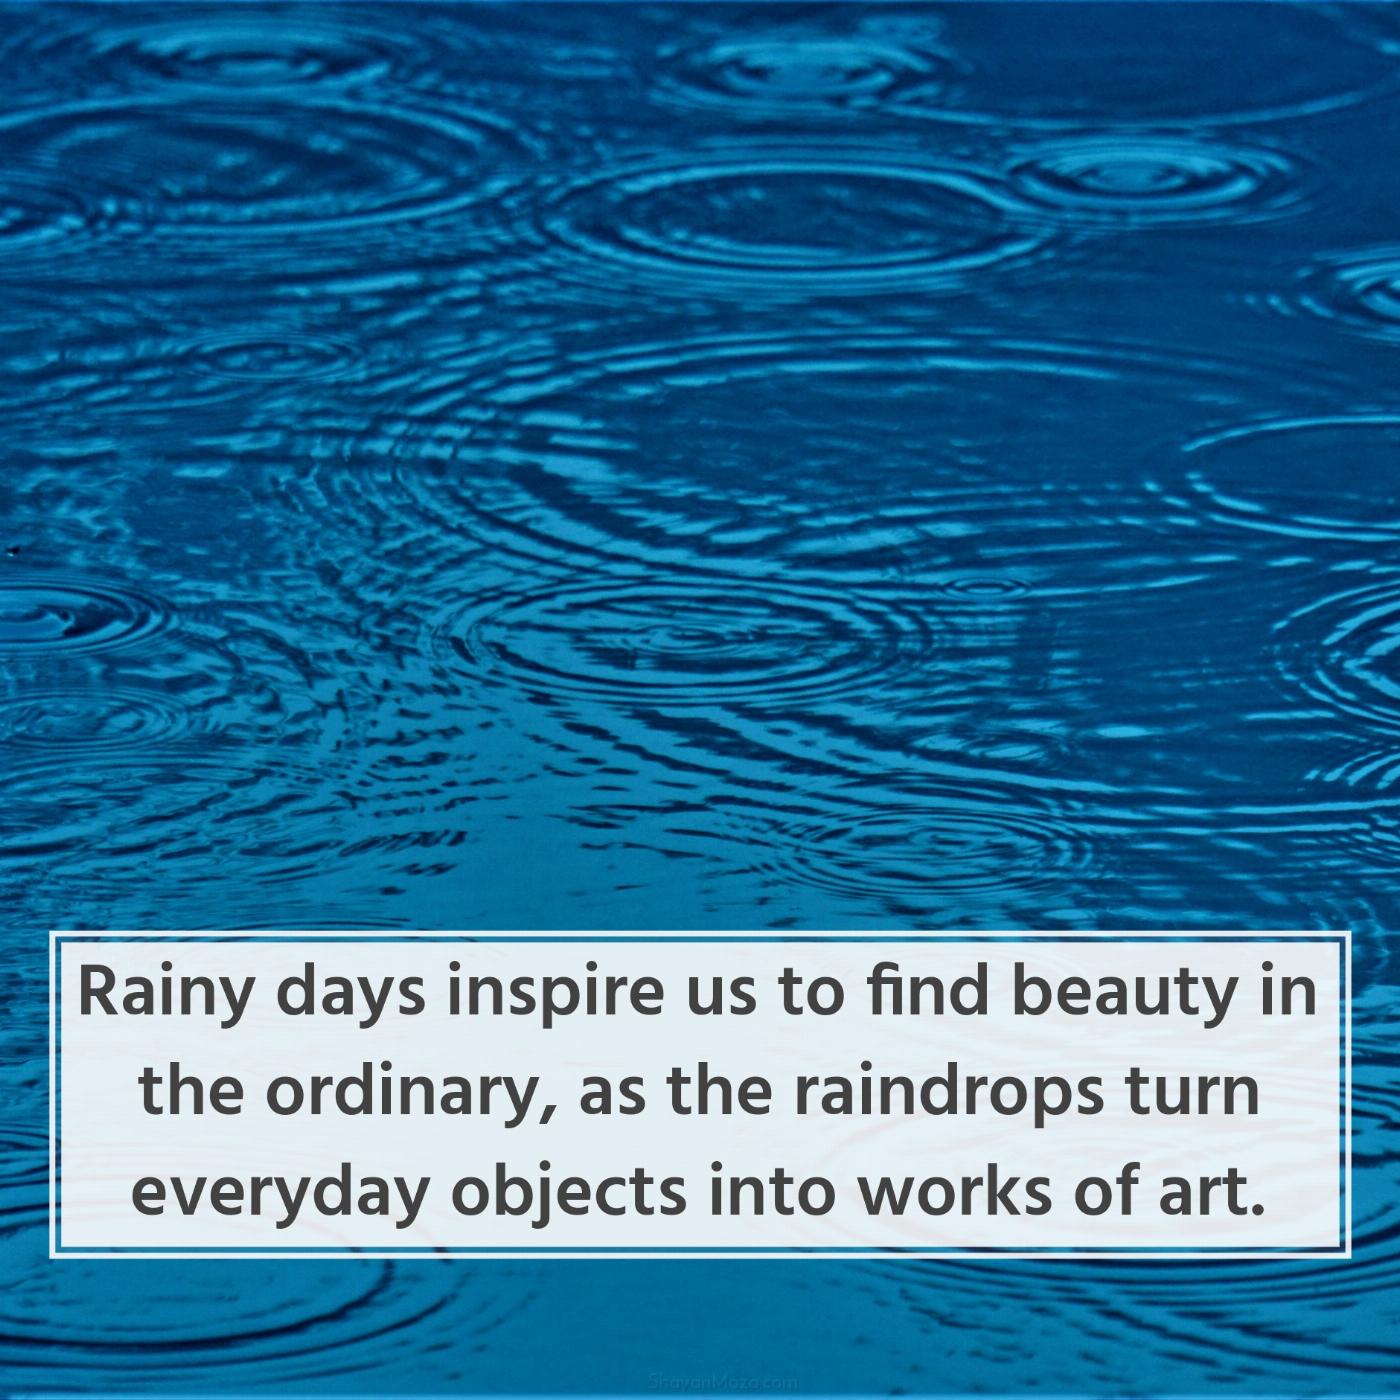 Rainy days inspire us to find beauty in the ordinary